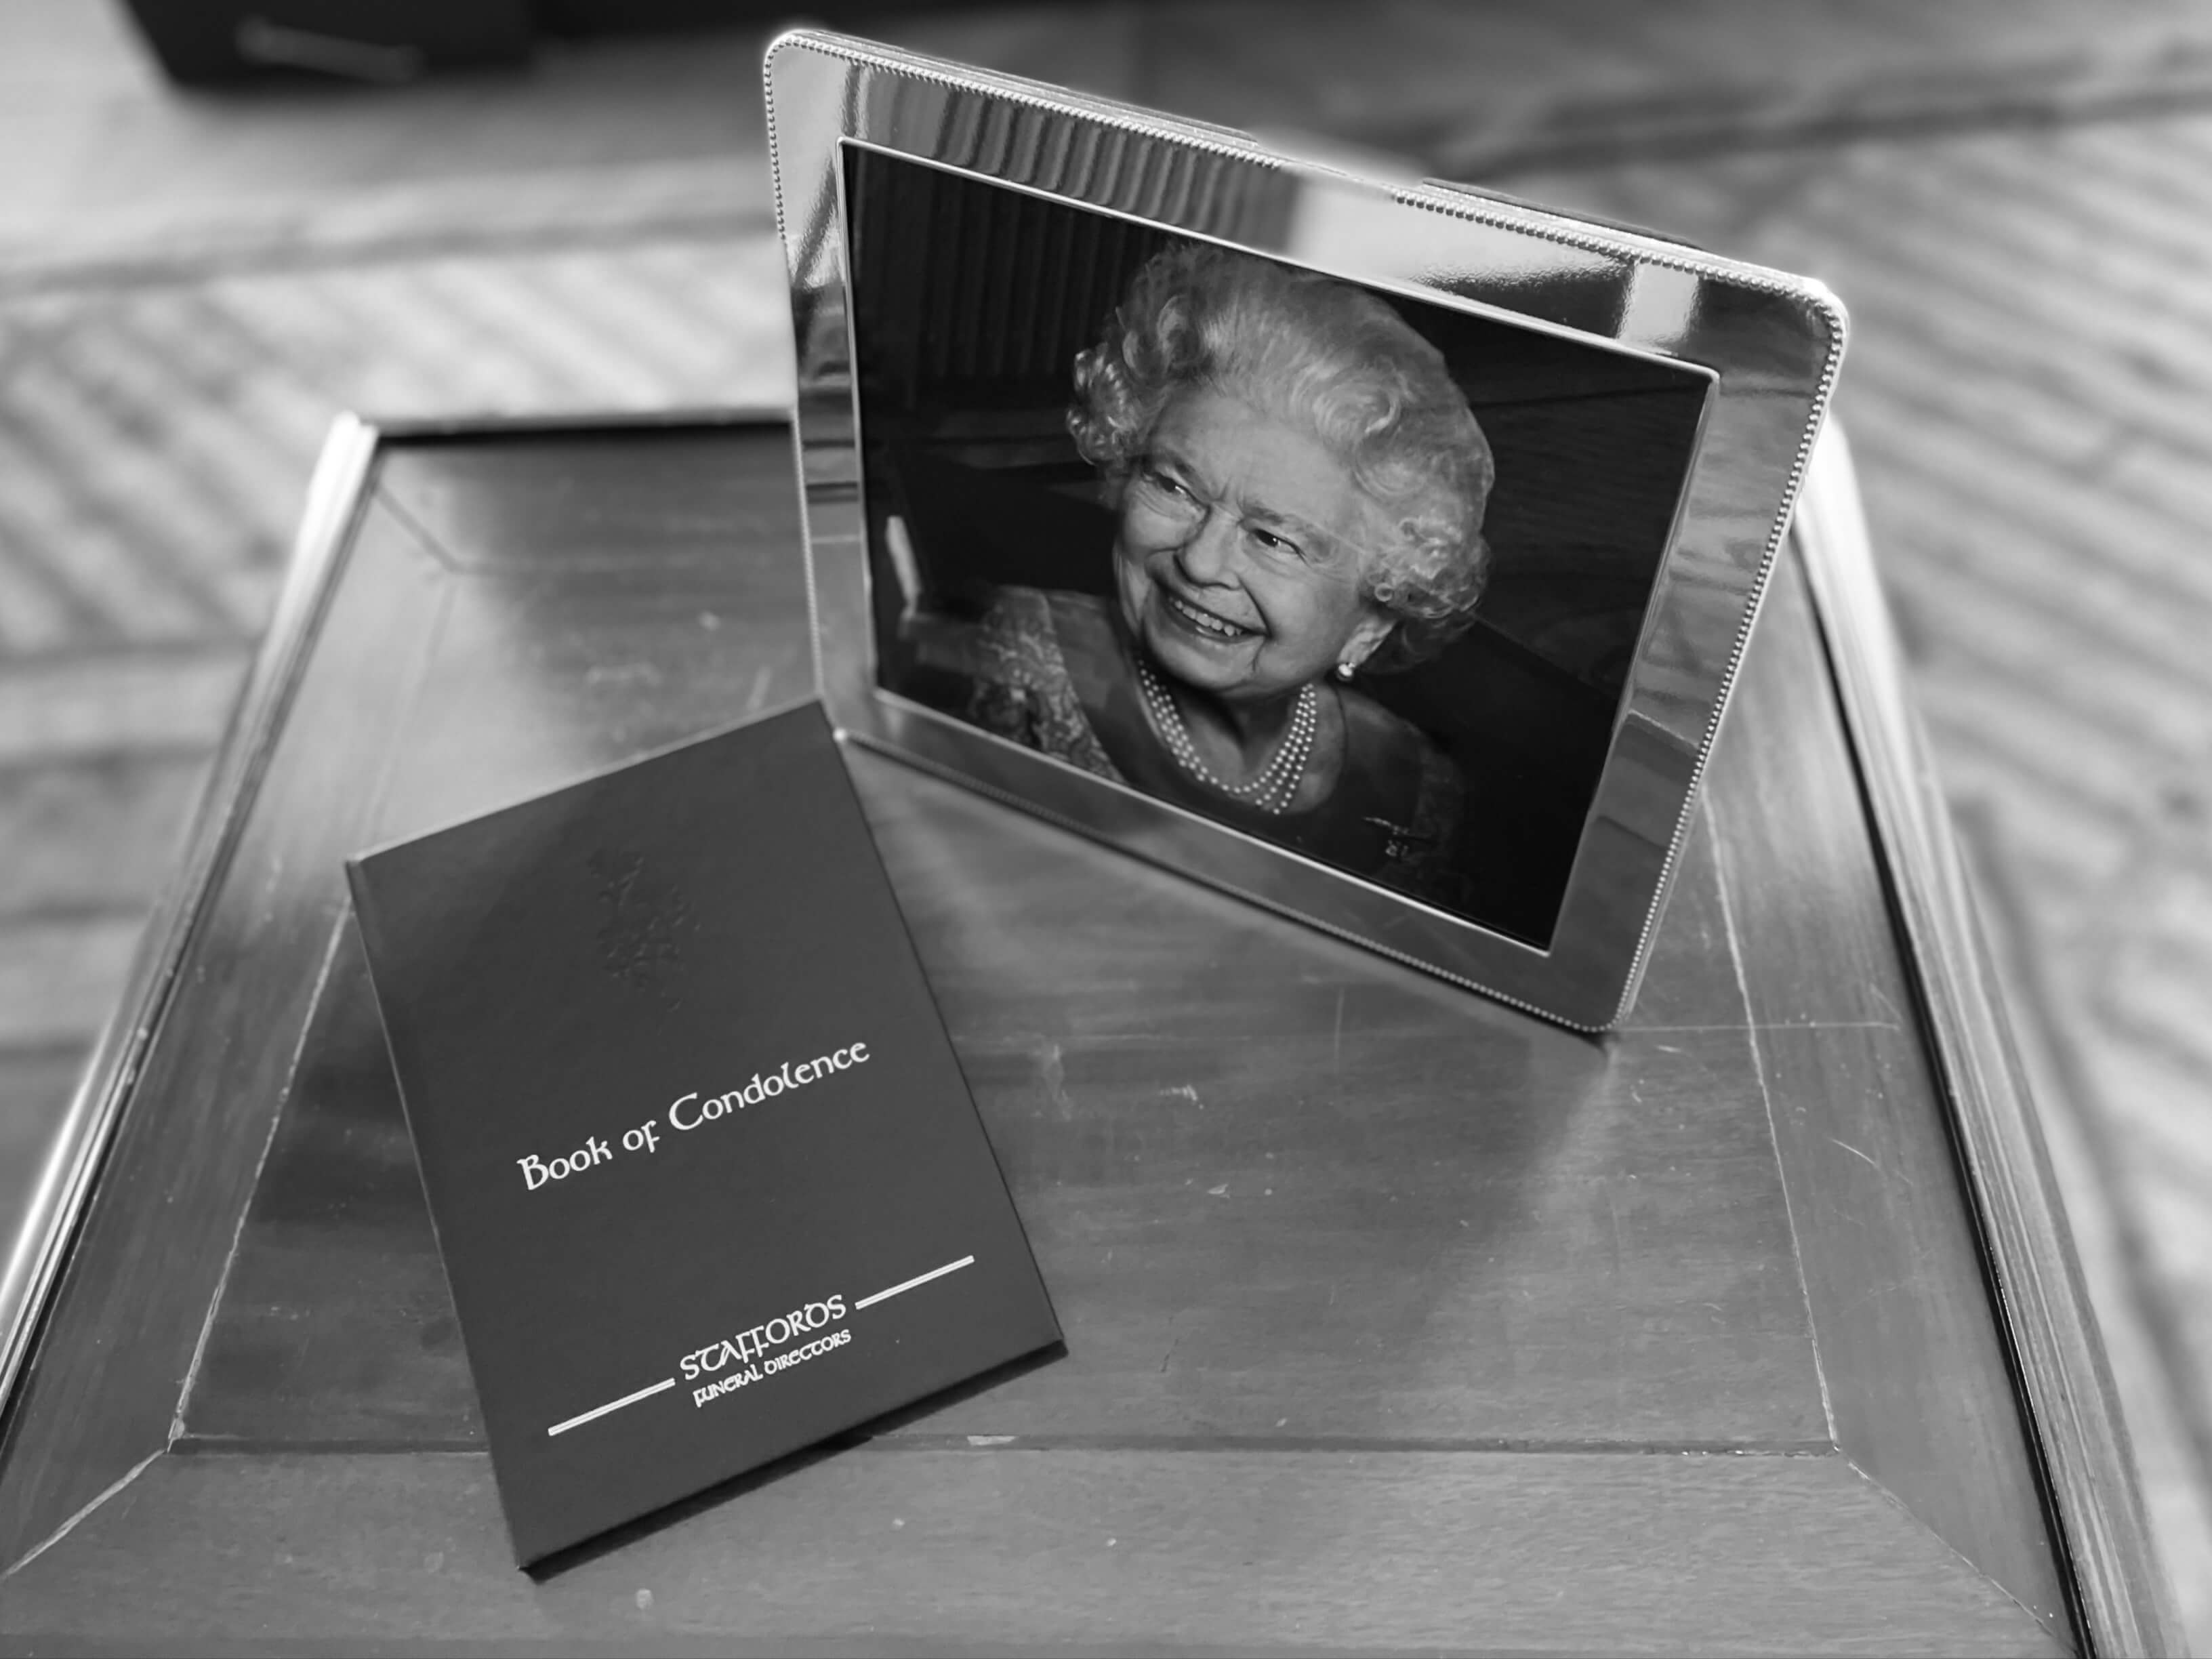 Black and white photograph of a framed head and shoulders photograph of Queen Elizabeth II in a silver frame, accompanied on a table by a black-covered book of condolence